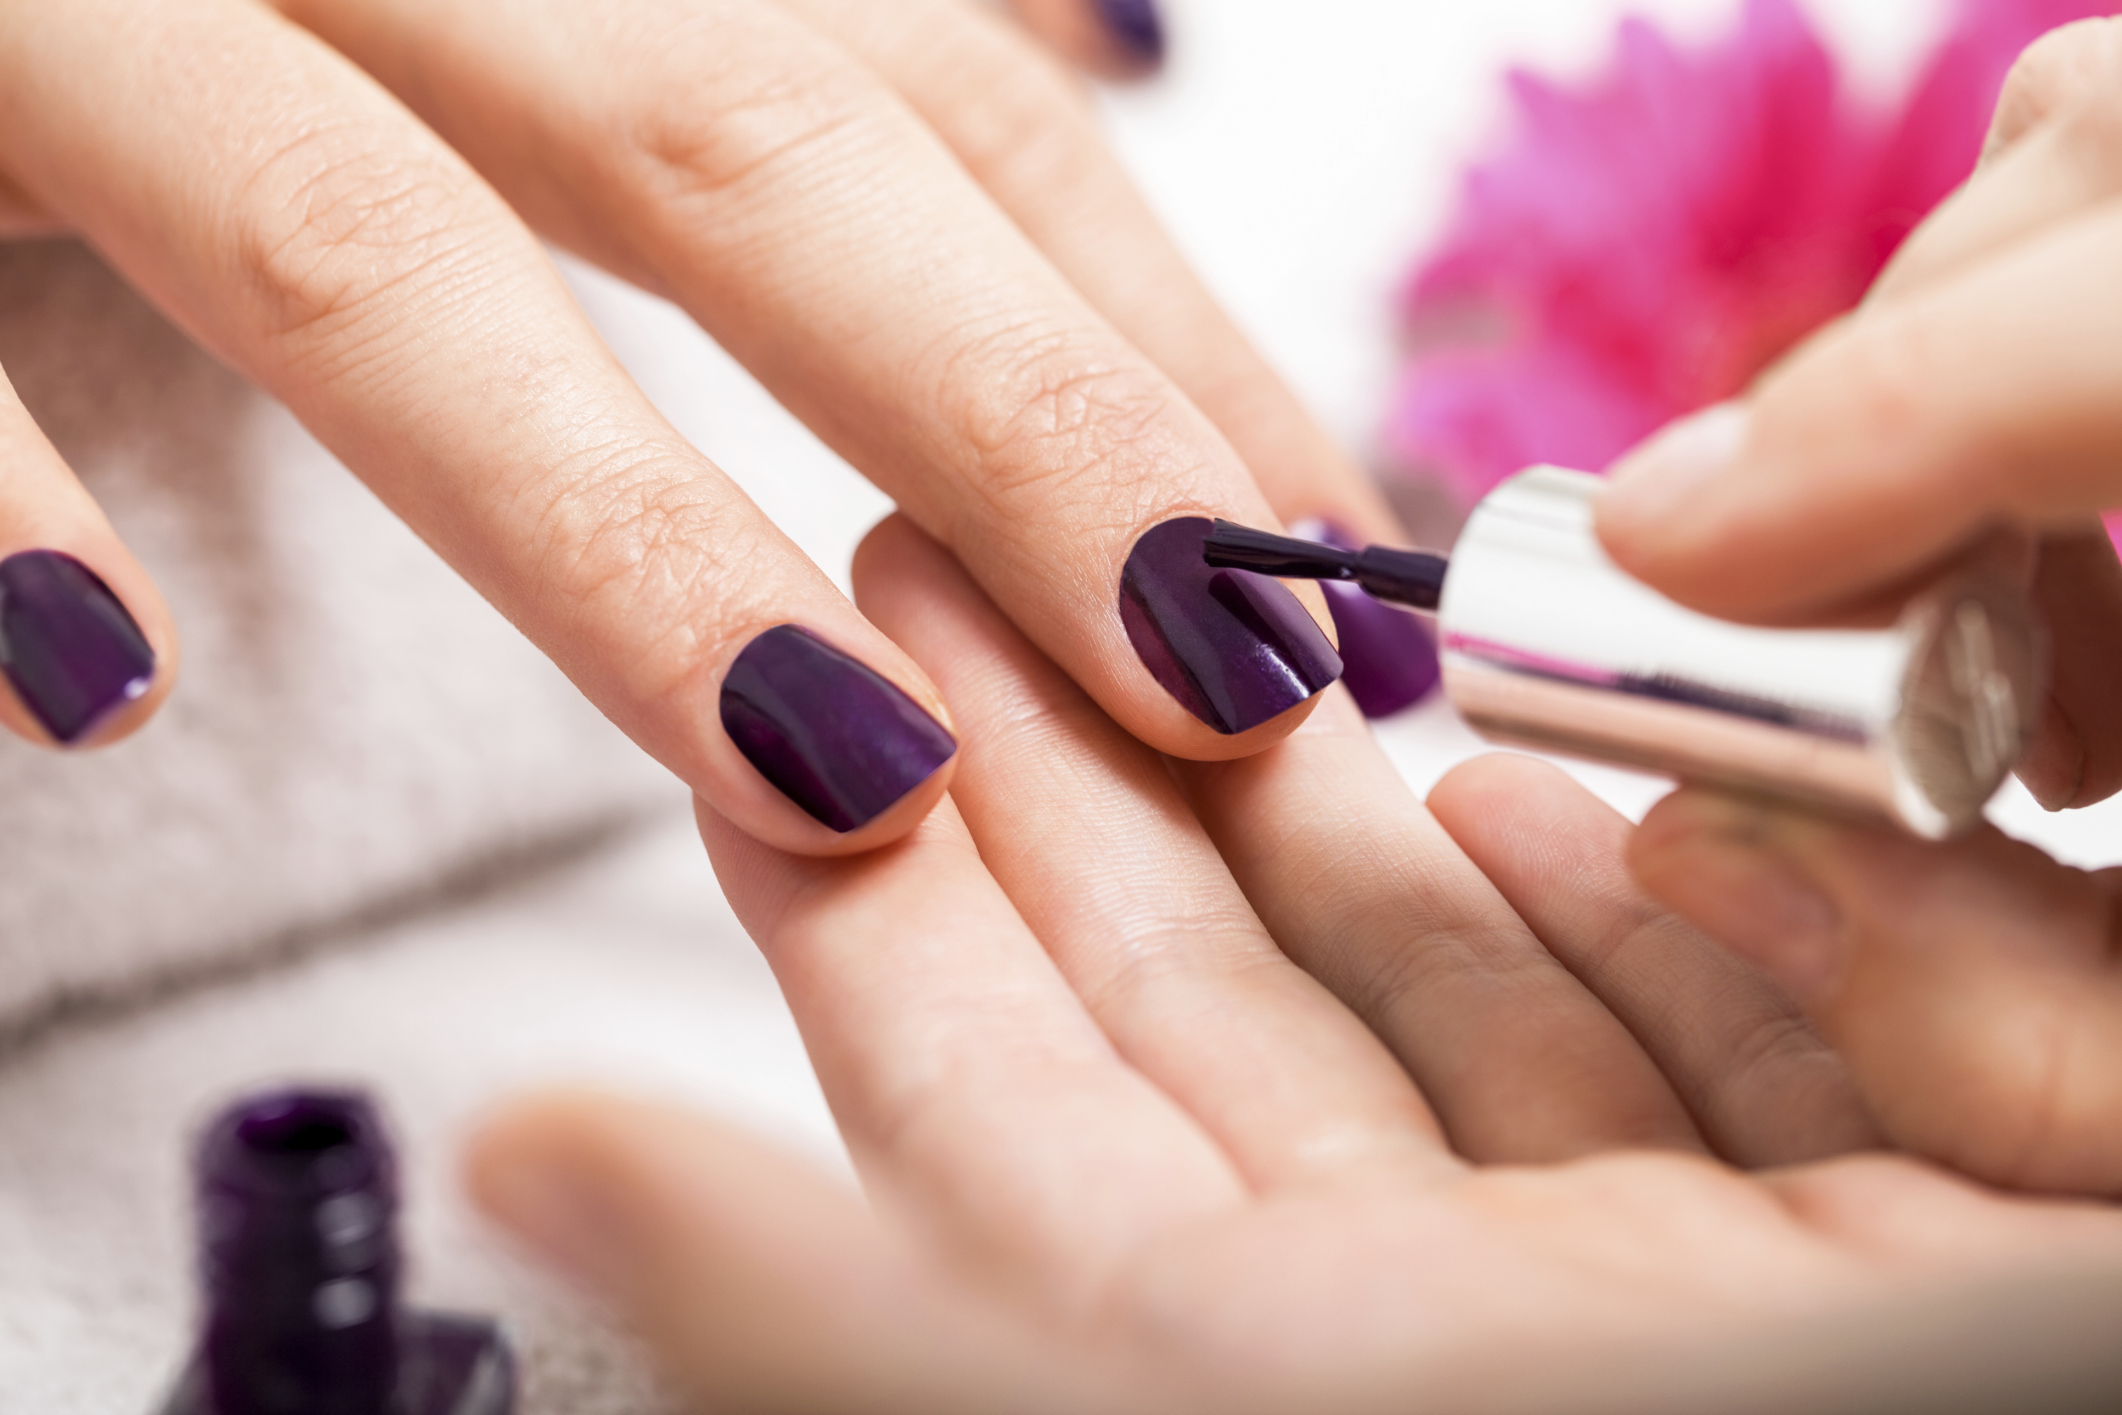 The Effects of Nail Polish Ingredients | LIVESTRONG.COM